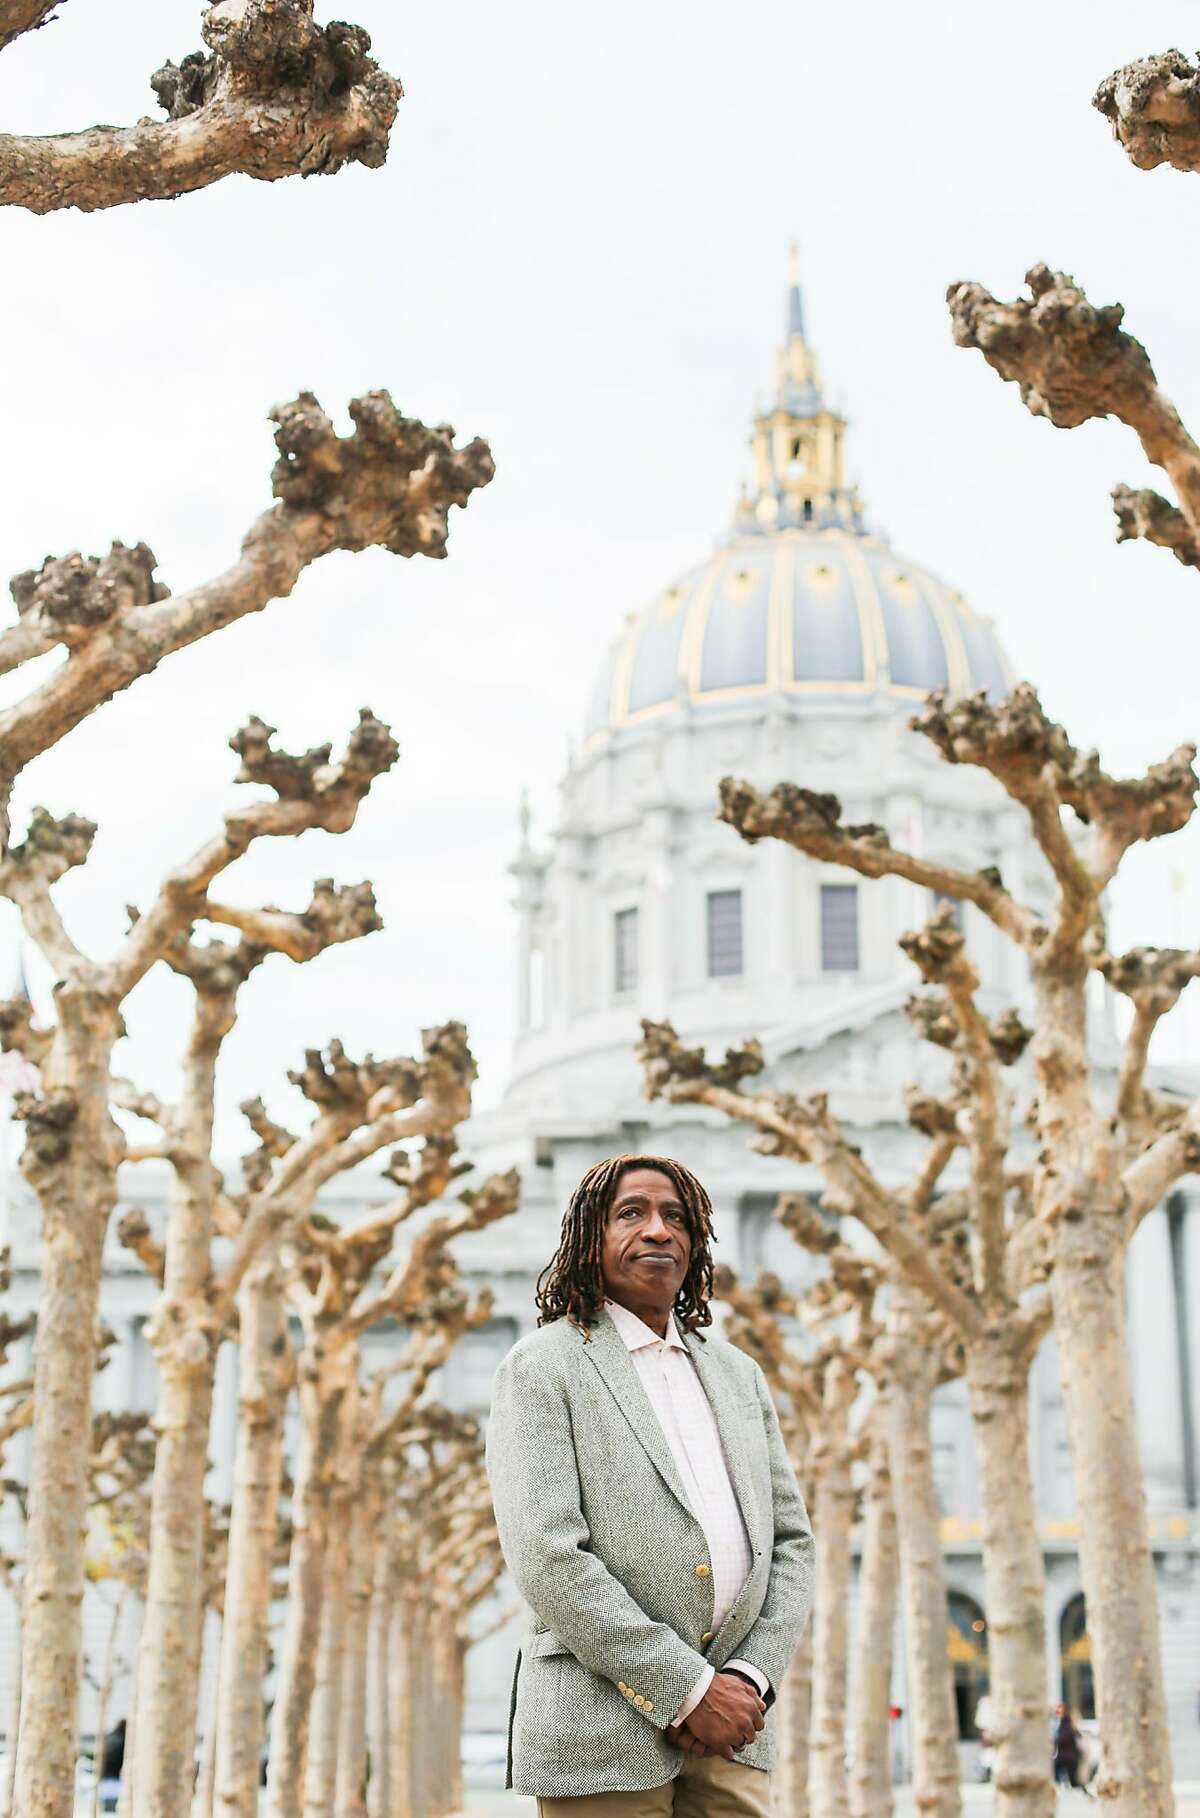 Ken Jones stands for a portrait outside City Hall in San Francisco, California, on Wednesday, Feb. 15, 2017.